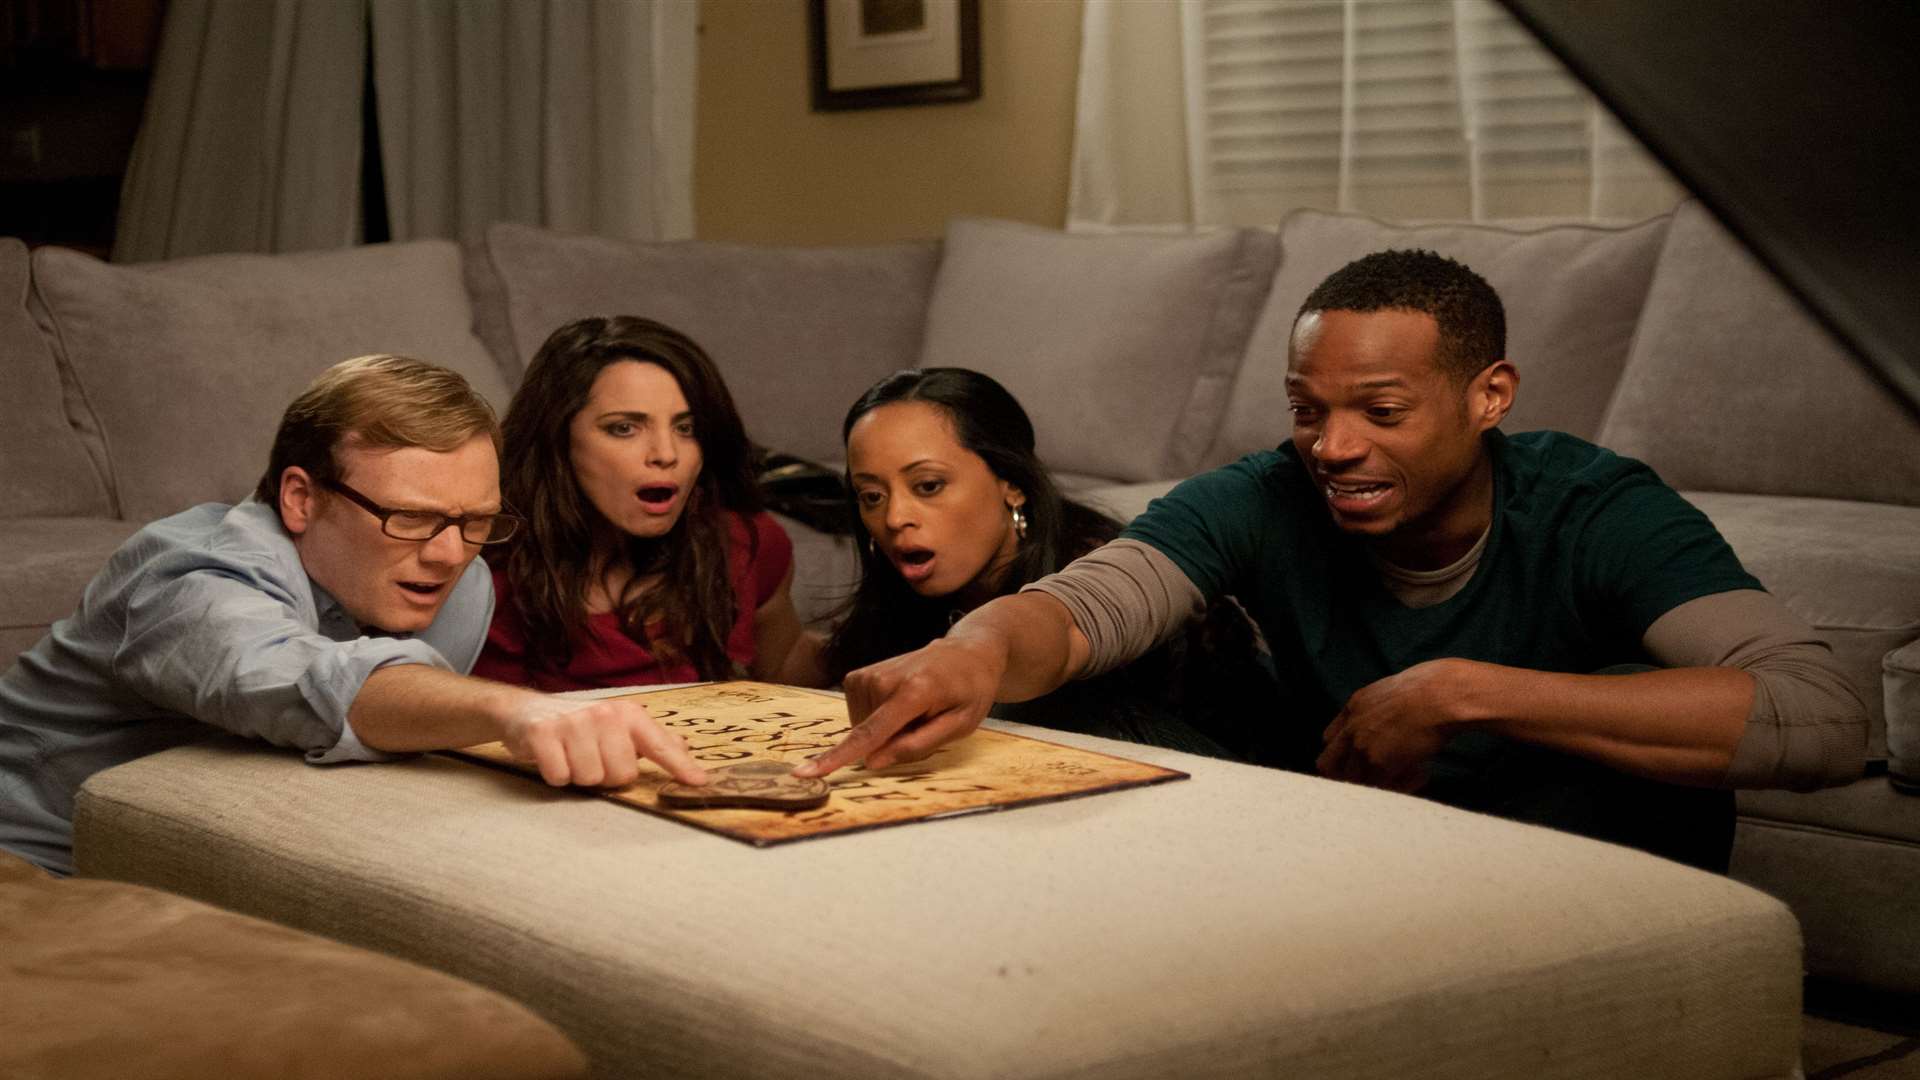 A Haunted House with Andrew Daly as Steve, Alanna Ubach as Jenny, Marlon Wayans as Malcolm and Essence Atkins at Kisha. Picture: PA Photo/Handout.